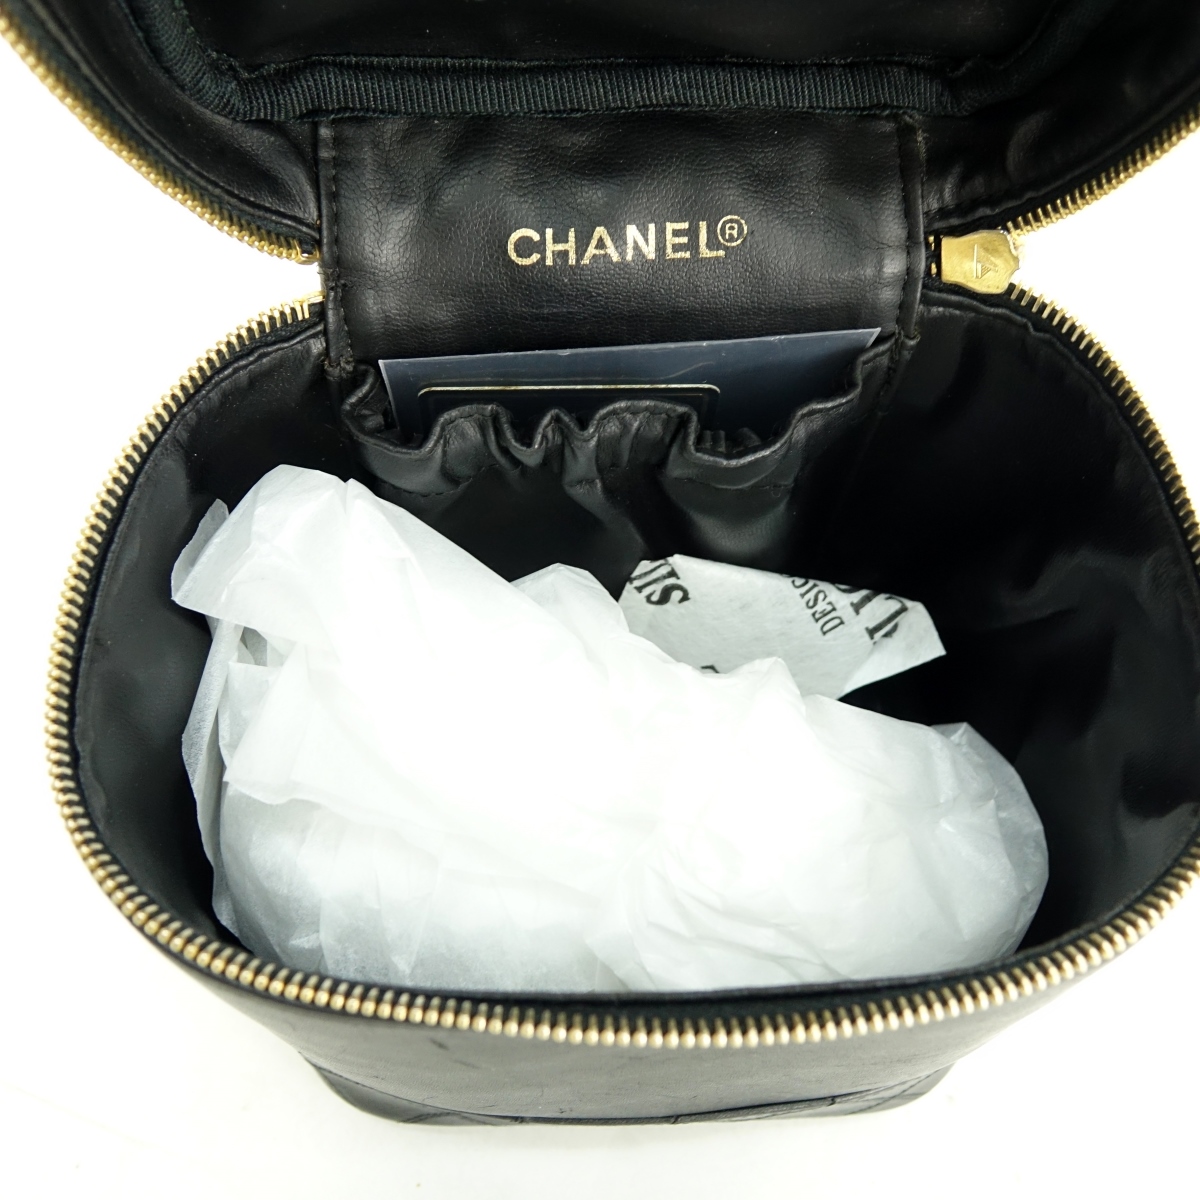 Chanel Cosmetic Case